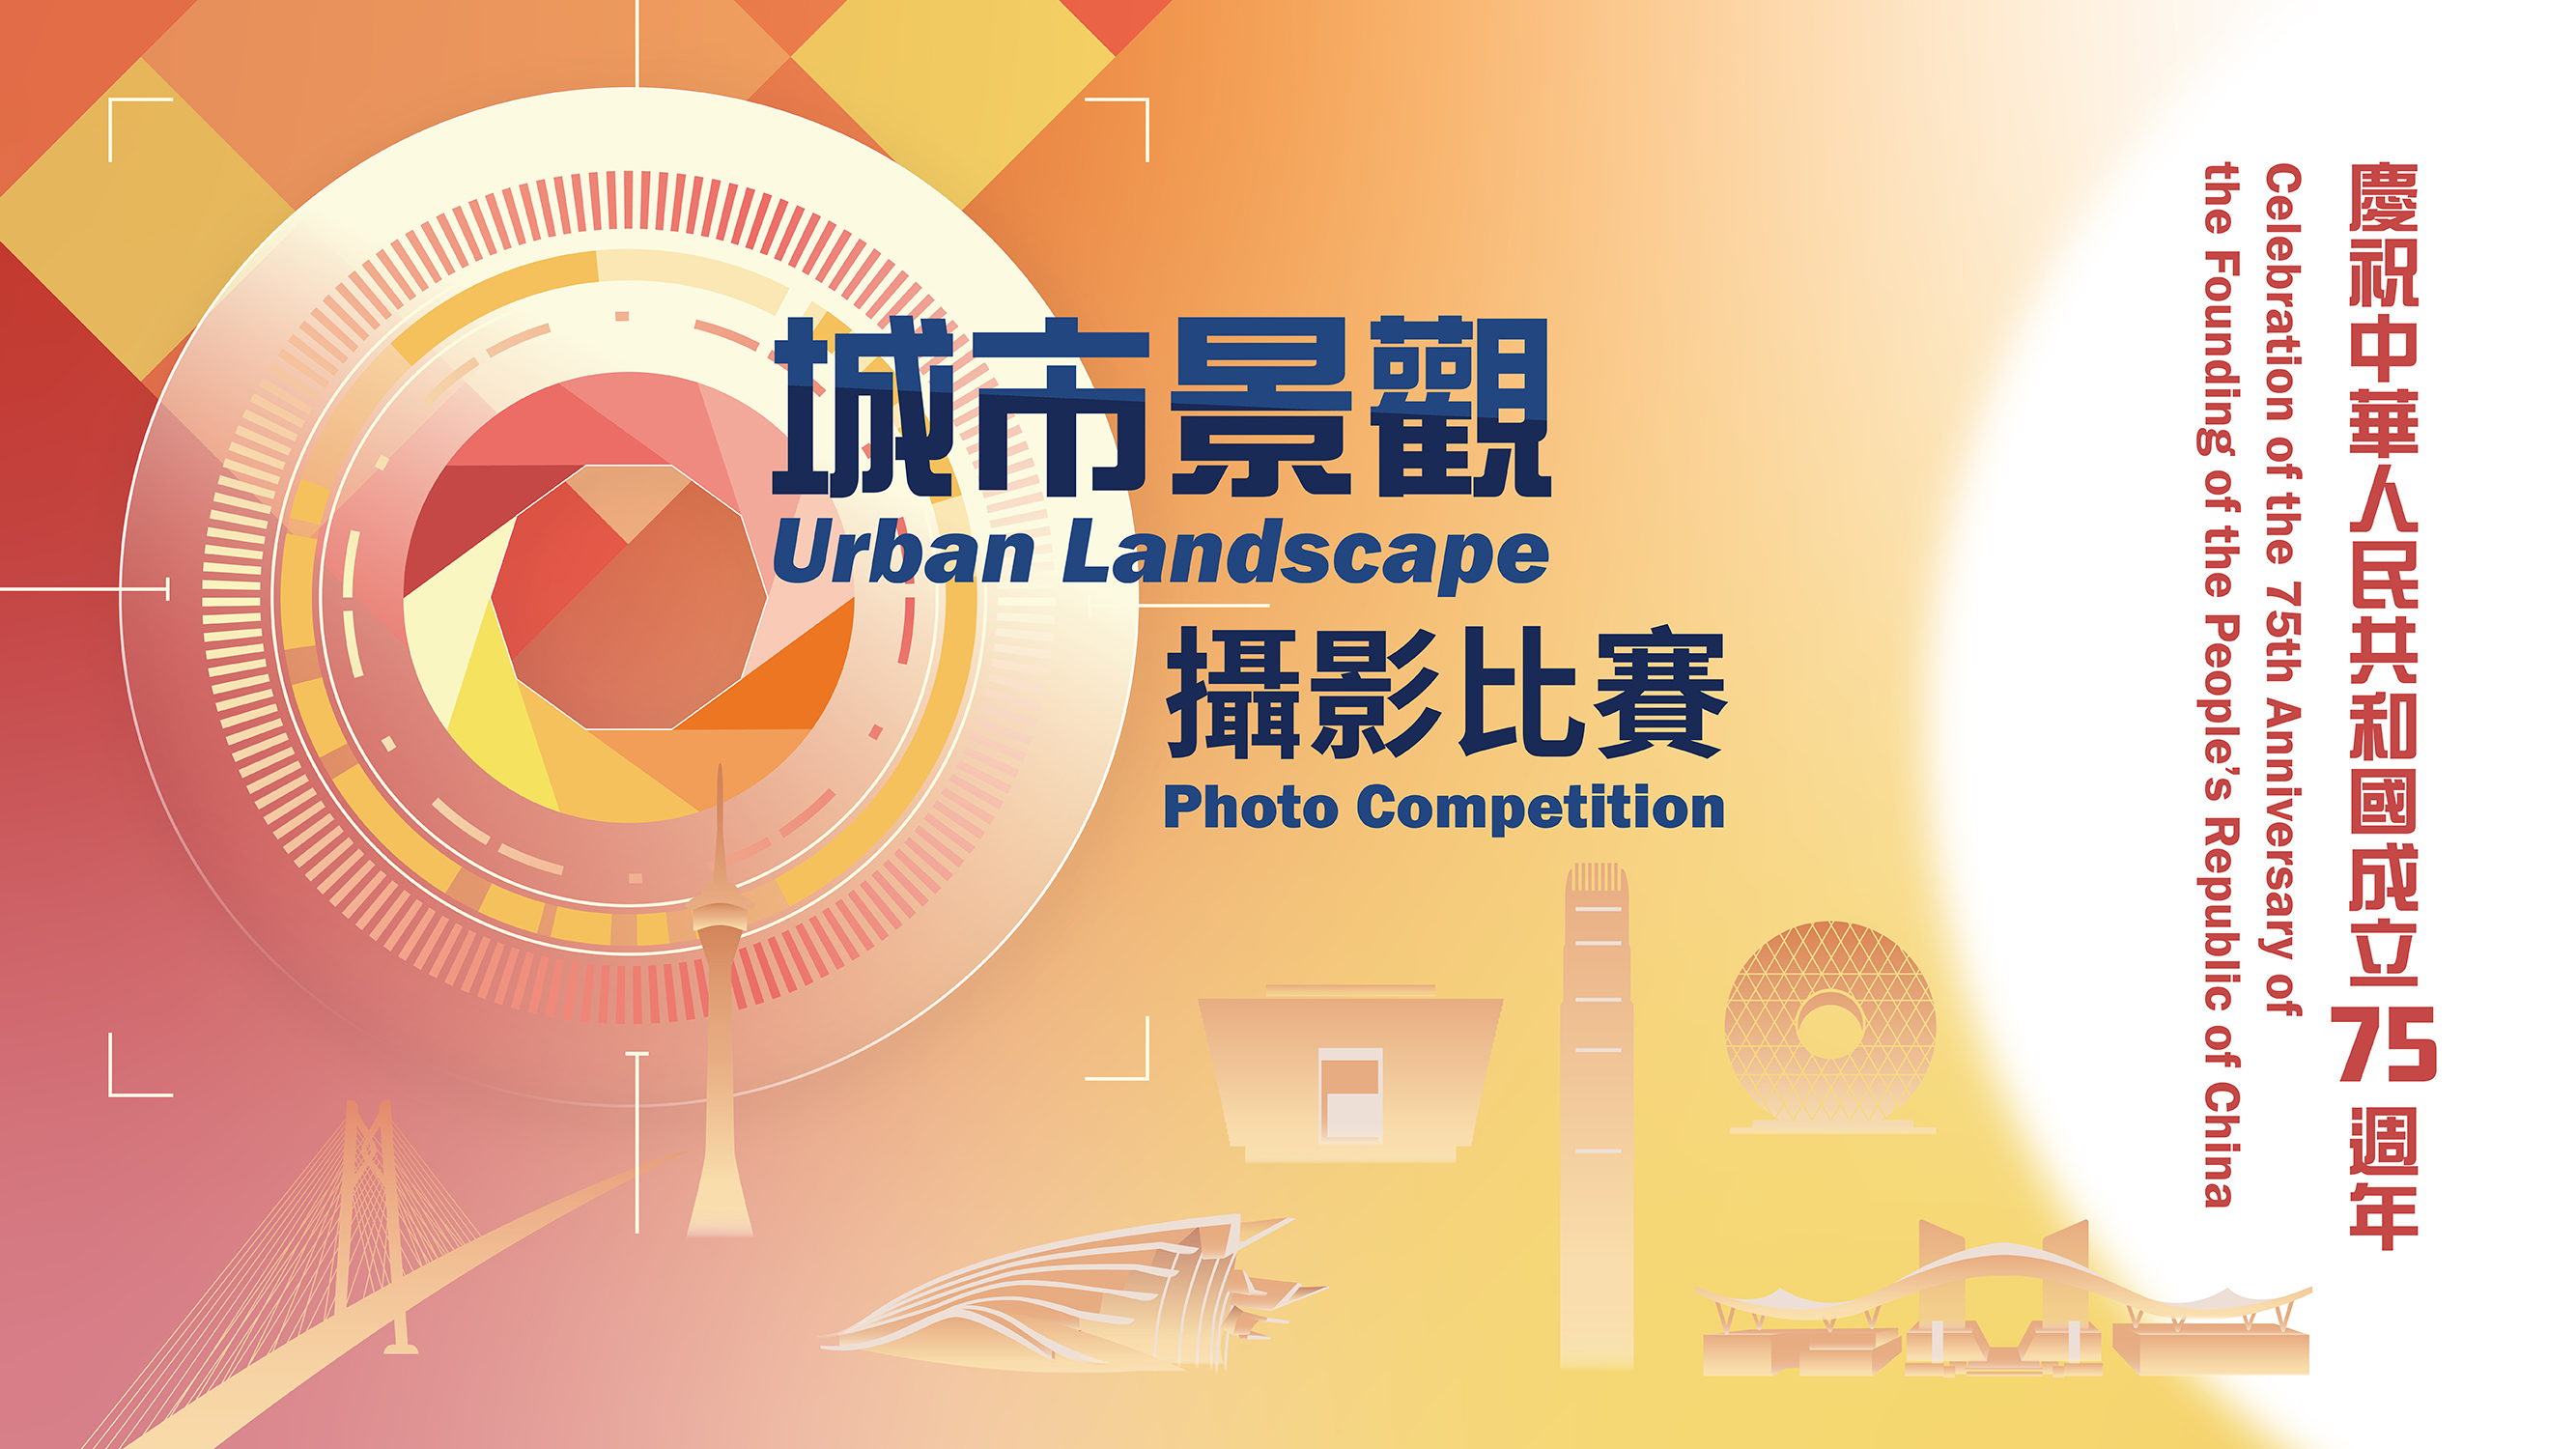 Celebration of the 75th Anniversary of the Founding of the People’s Republic of China - Urban Landscape Photo Competition